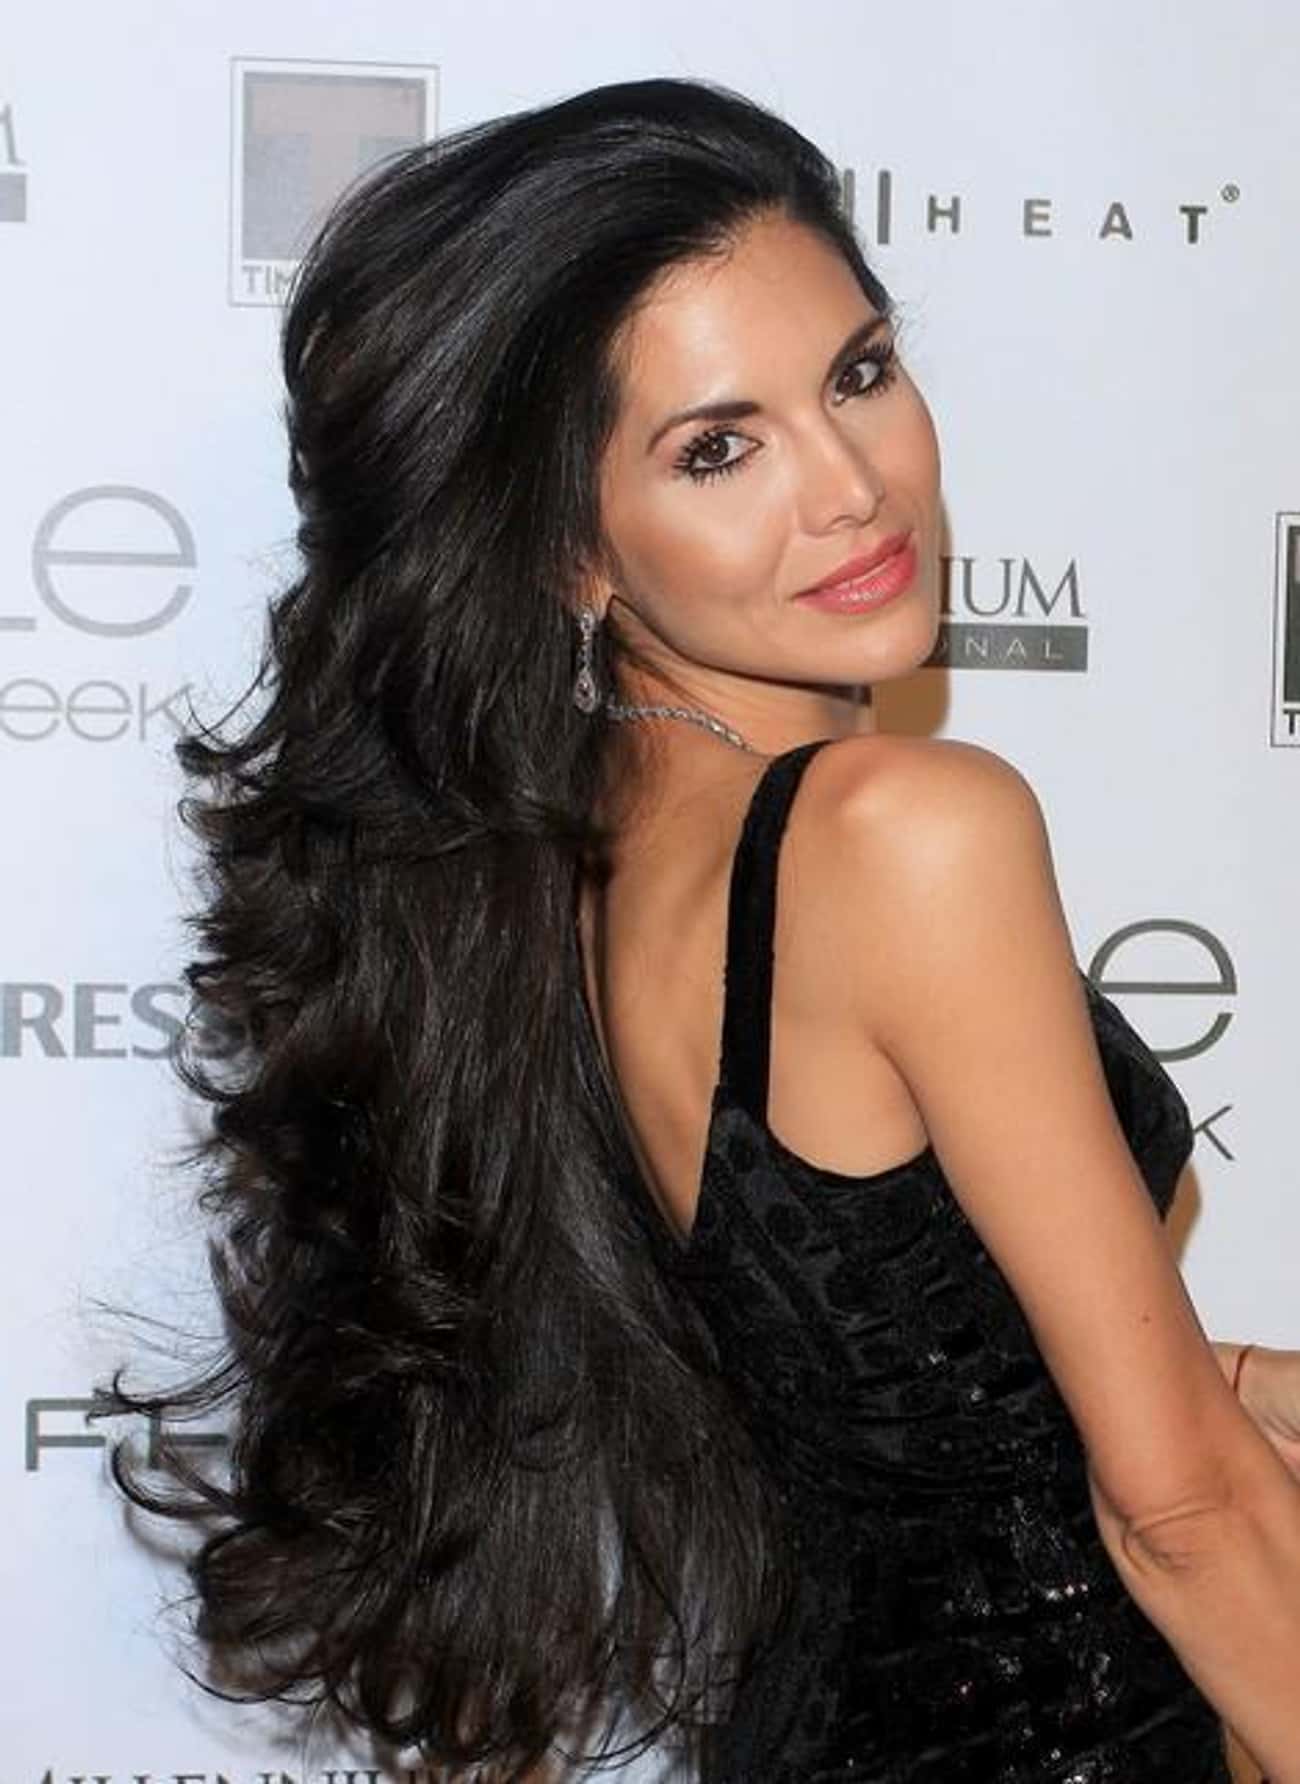 Joyce Giraud, “Real Housewives of Beverly Hills”